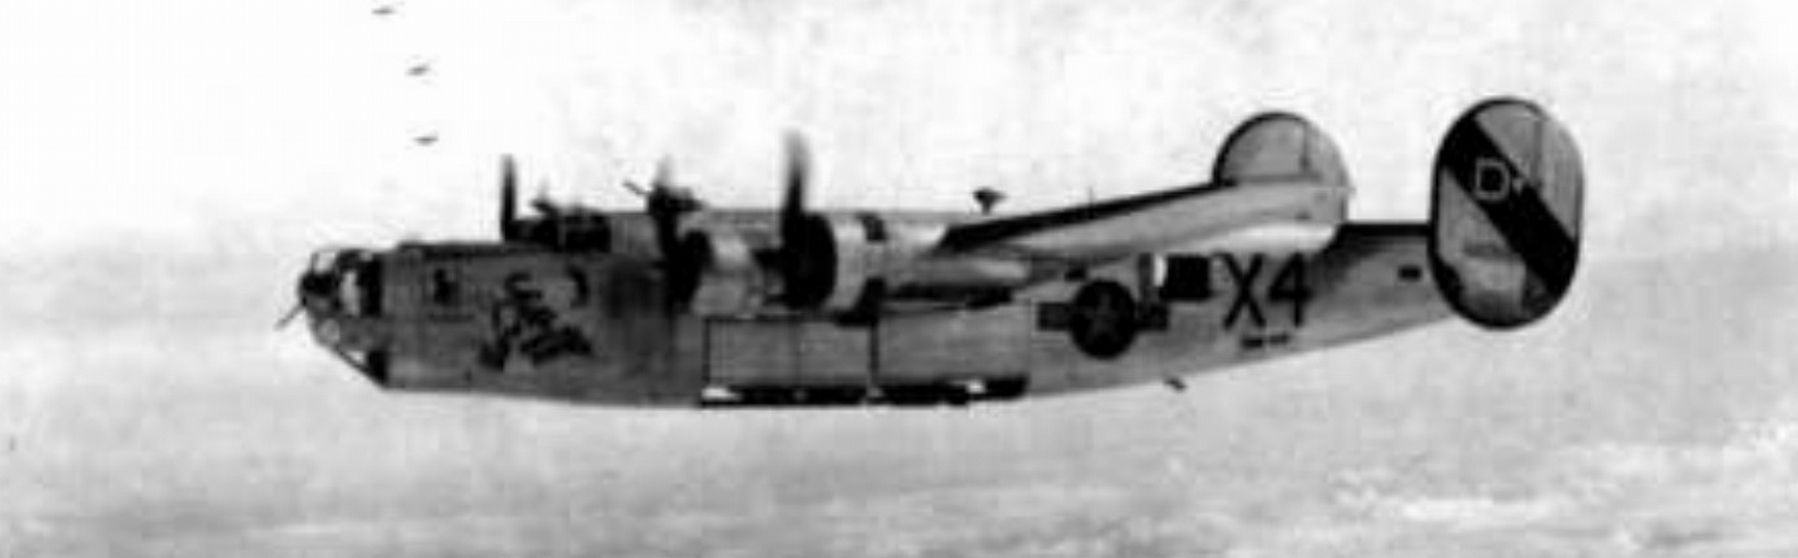 A B-24 Liberator from the 859th Bombardment Squadron, 492nd Bombardment Group, 8th Air Force, image. Click for full size.